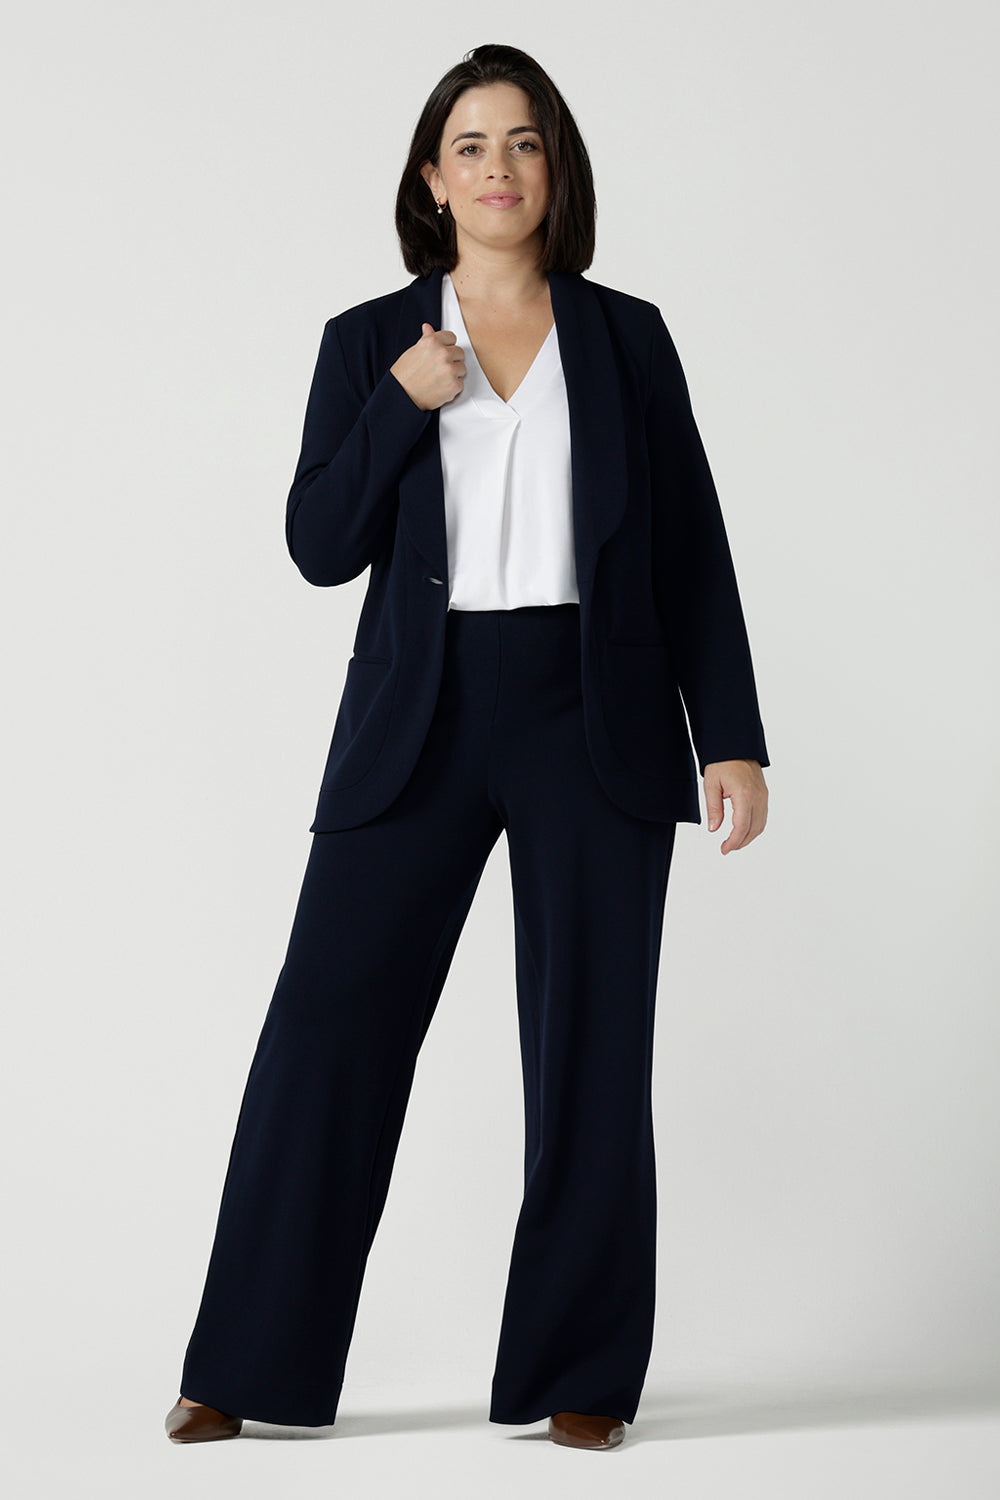 Size 10 women wearing a Navy Marit blazer with Scuba crepe and collar. It has functional patch pockets and tailored shawl collar. Stylish corporate casual wear for women. Made in Australia size 8 - 24.